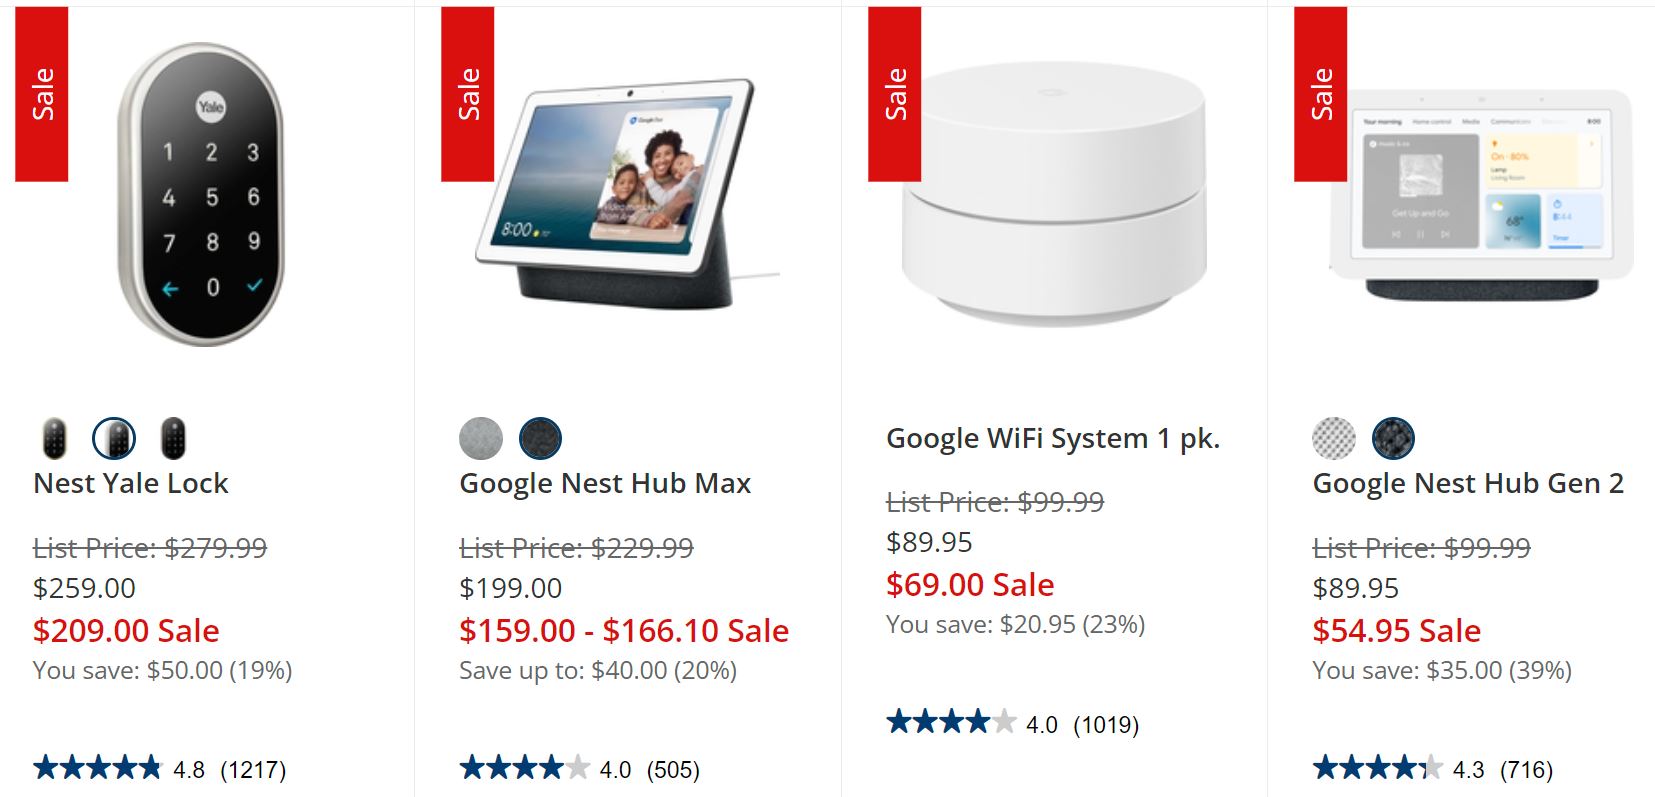 Google Nest Products *Military Only* - Nest Hub Max, Hello, Cam, Thermostat, etc $159